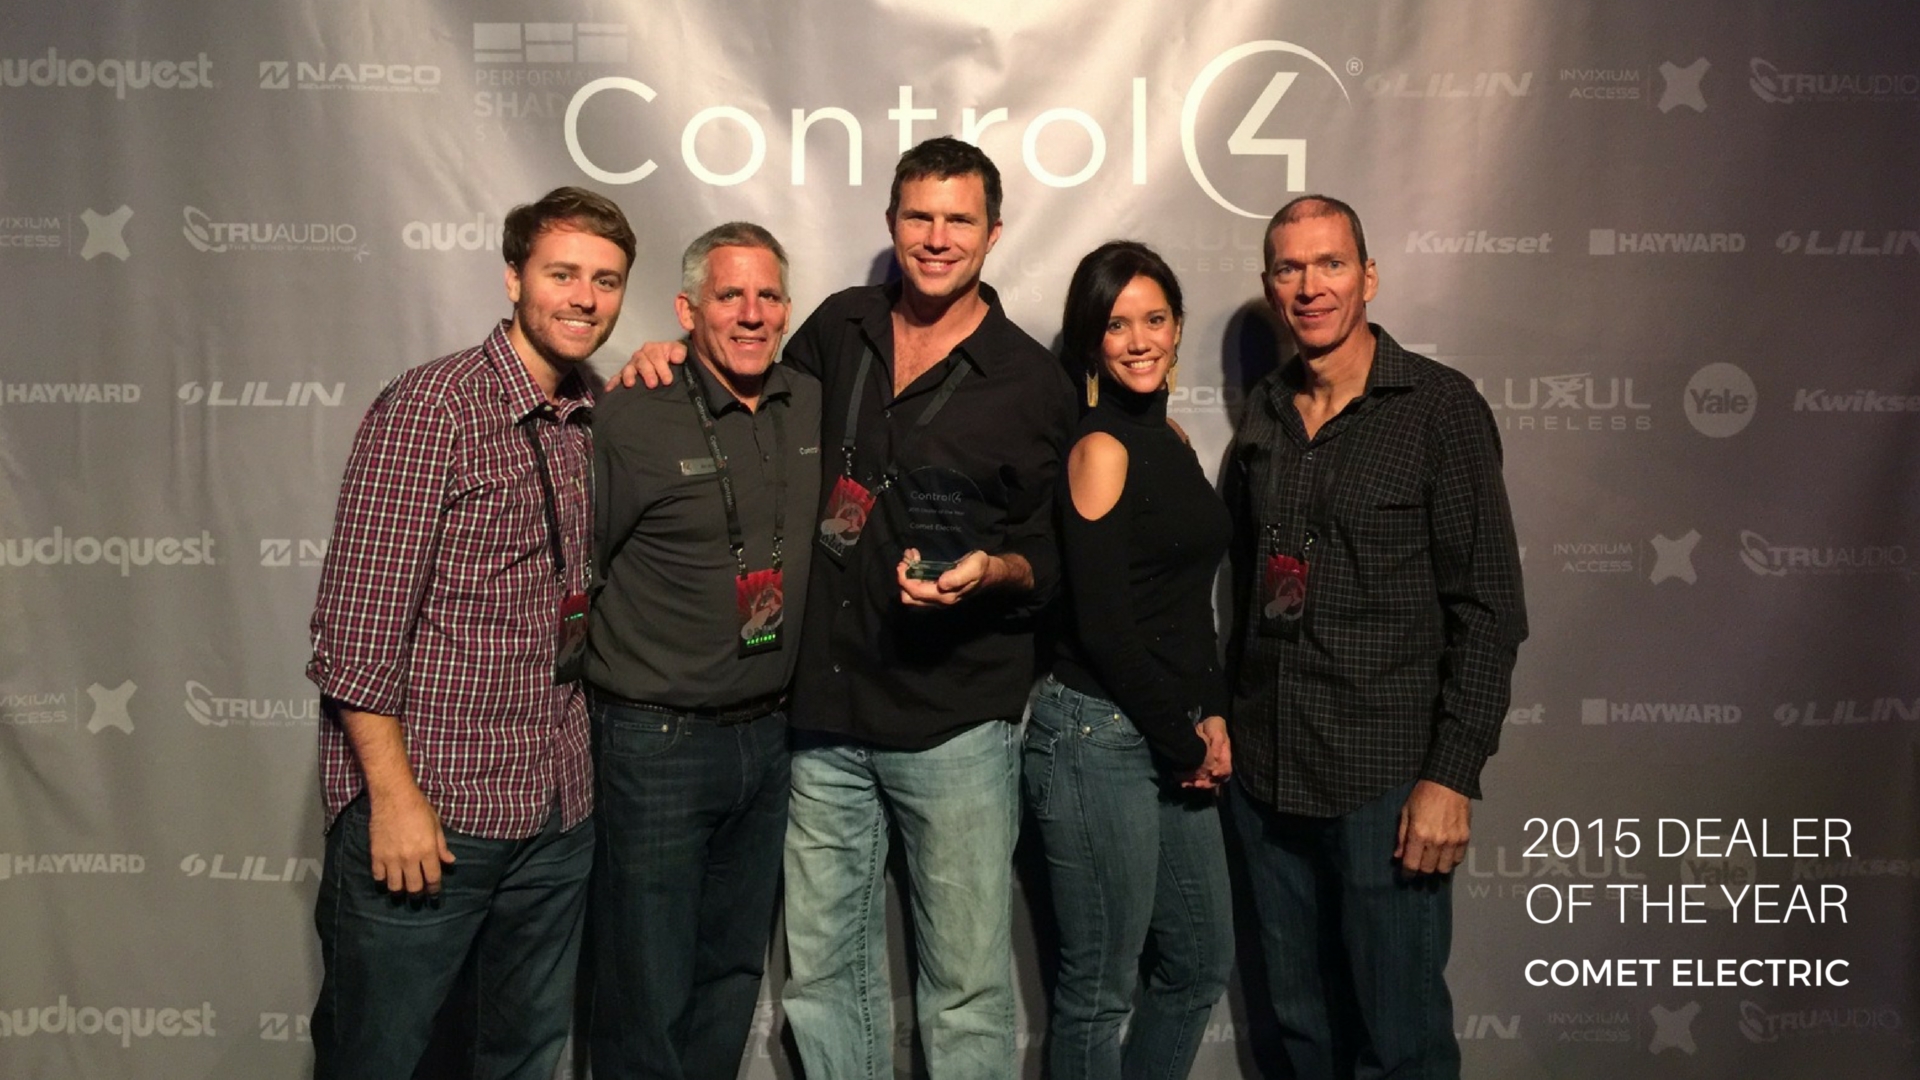 Control4 Celebrates Another Year of Dealer Growth with 2015 Dealer Awards of Excellence: cedia, cedia 2015, control4 dealers, 